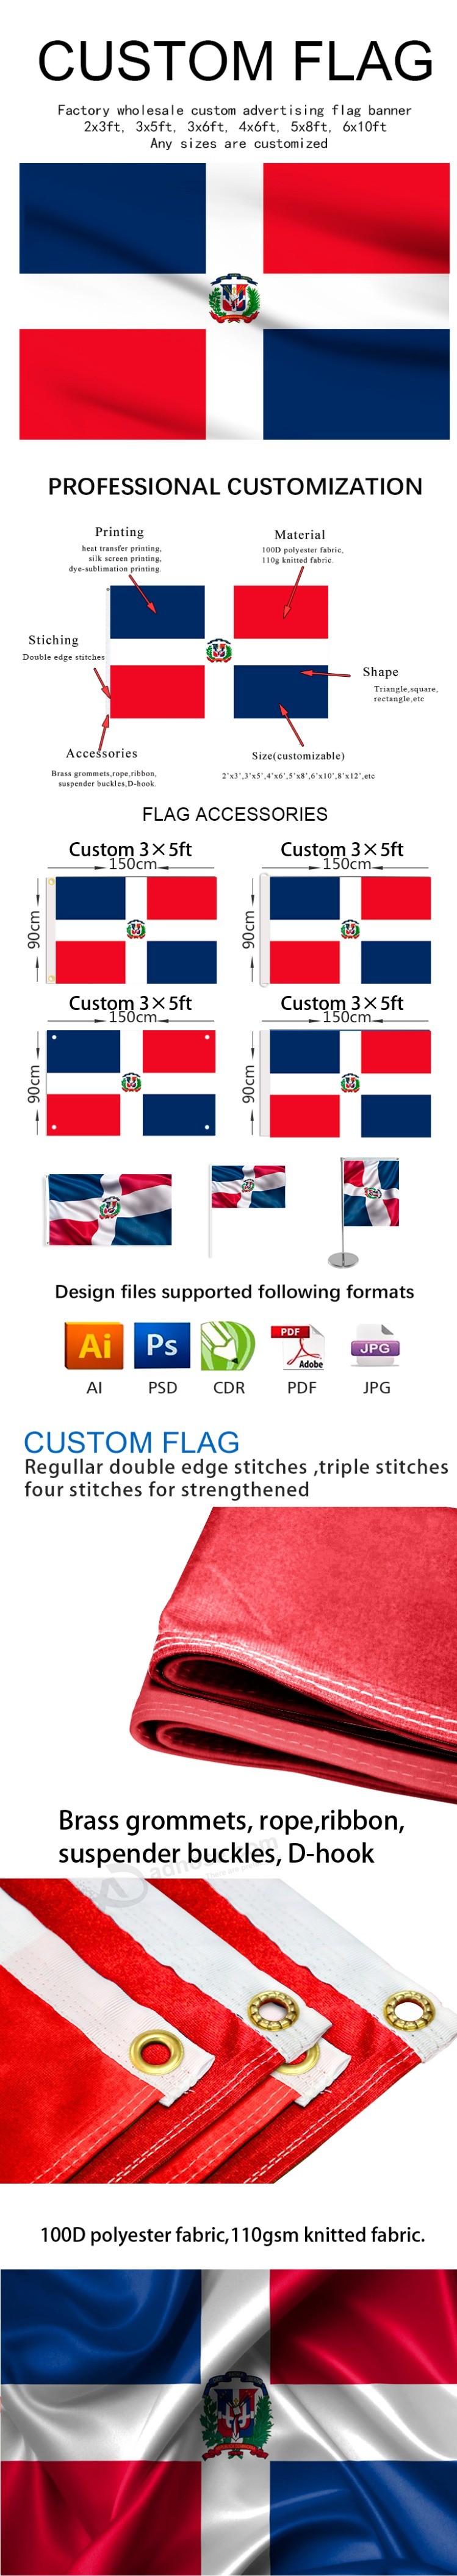 Direct cloth-printed heat sublimation national flags maker